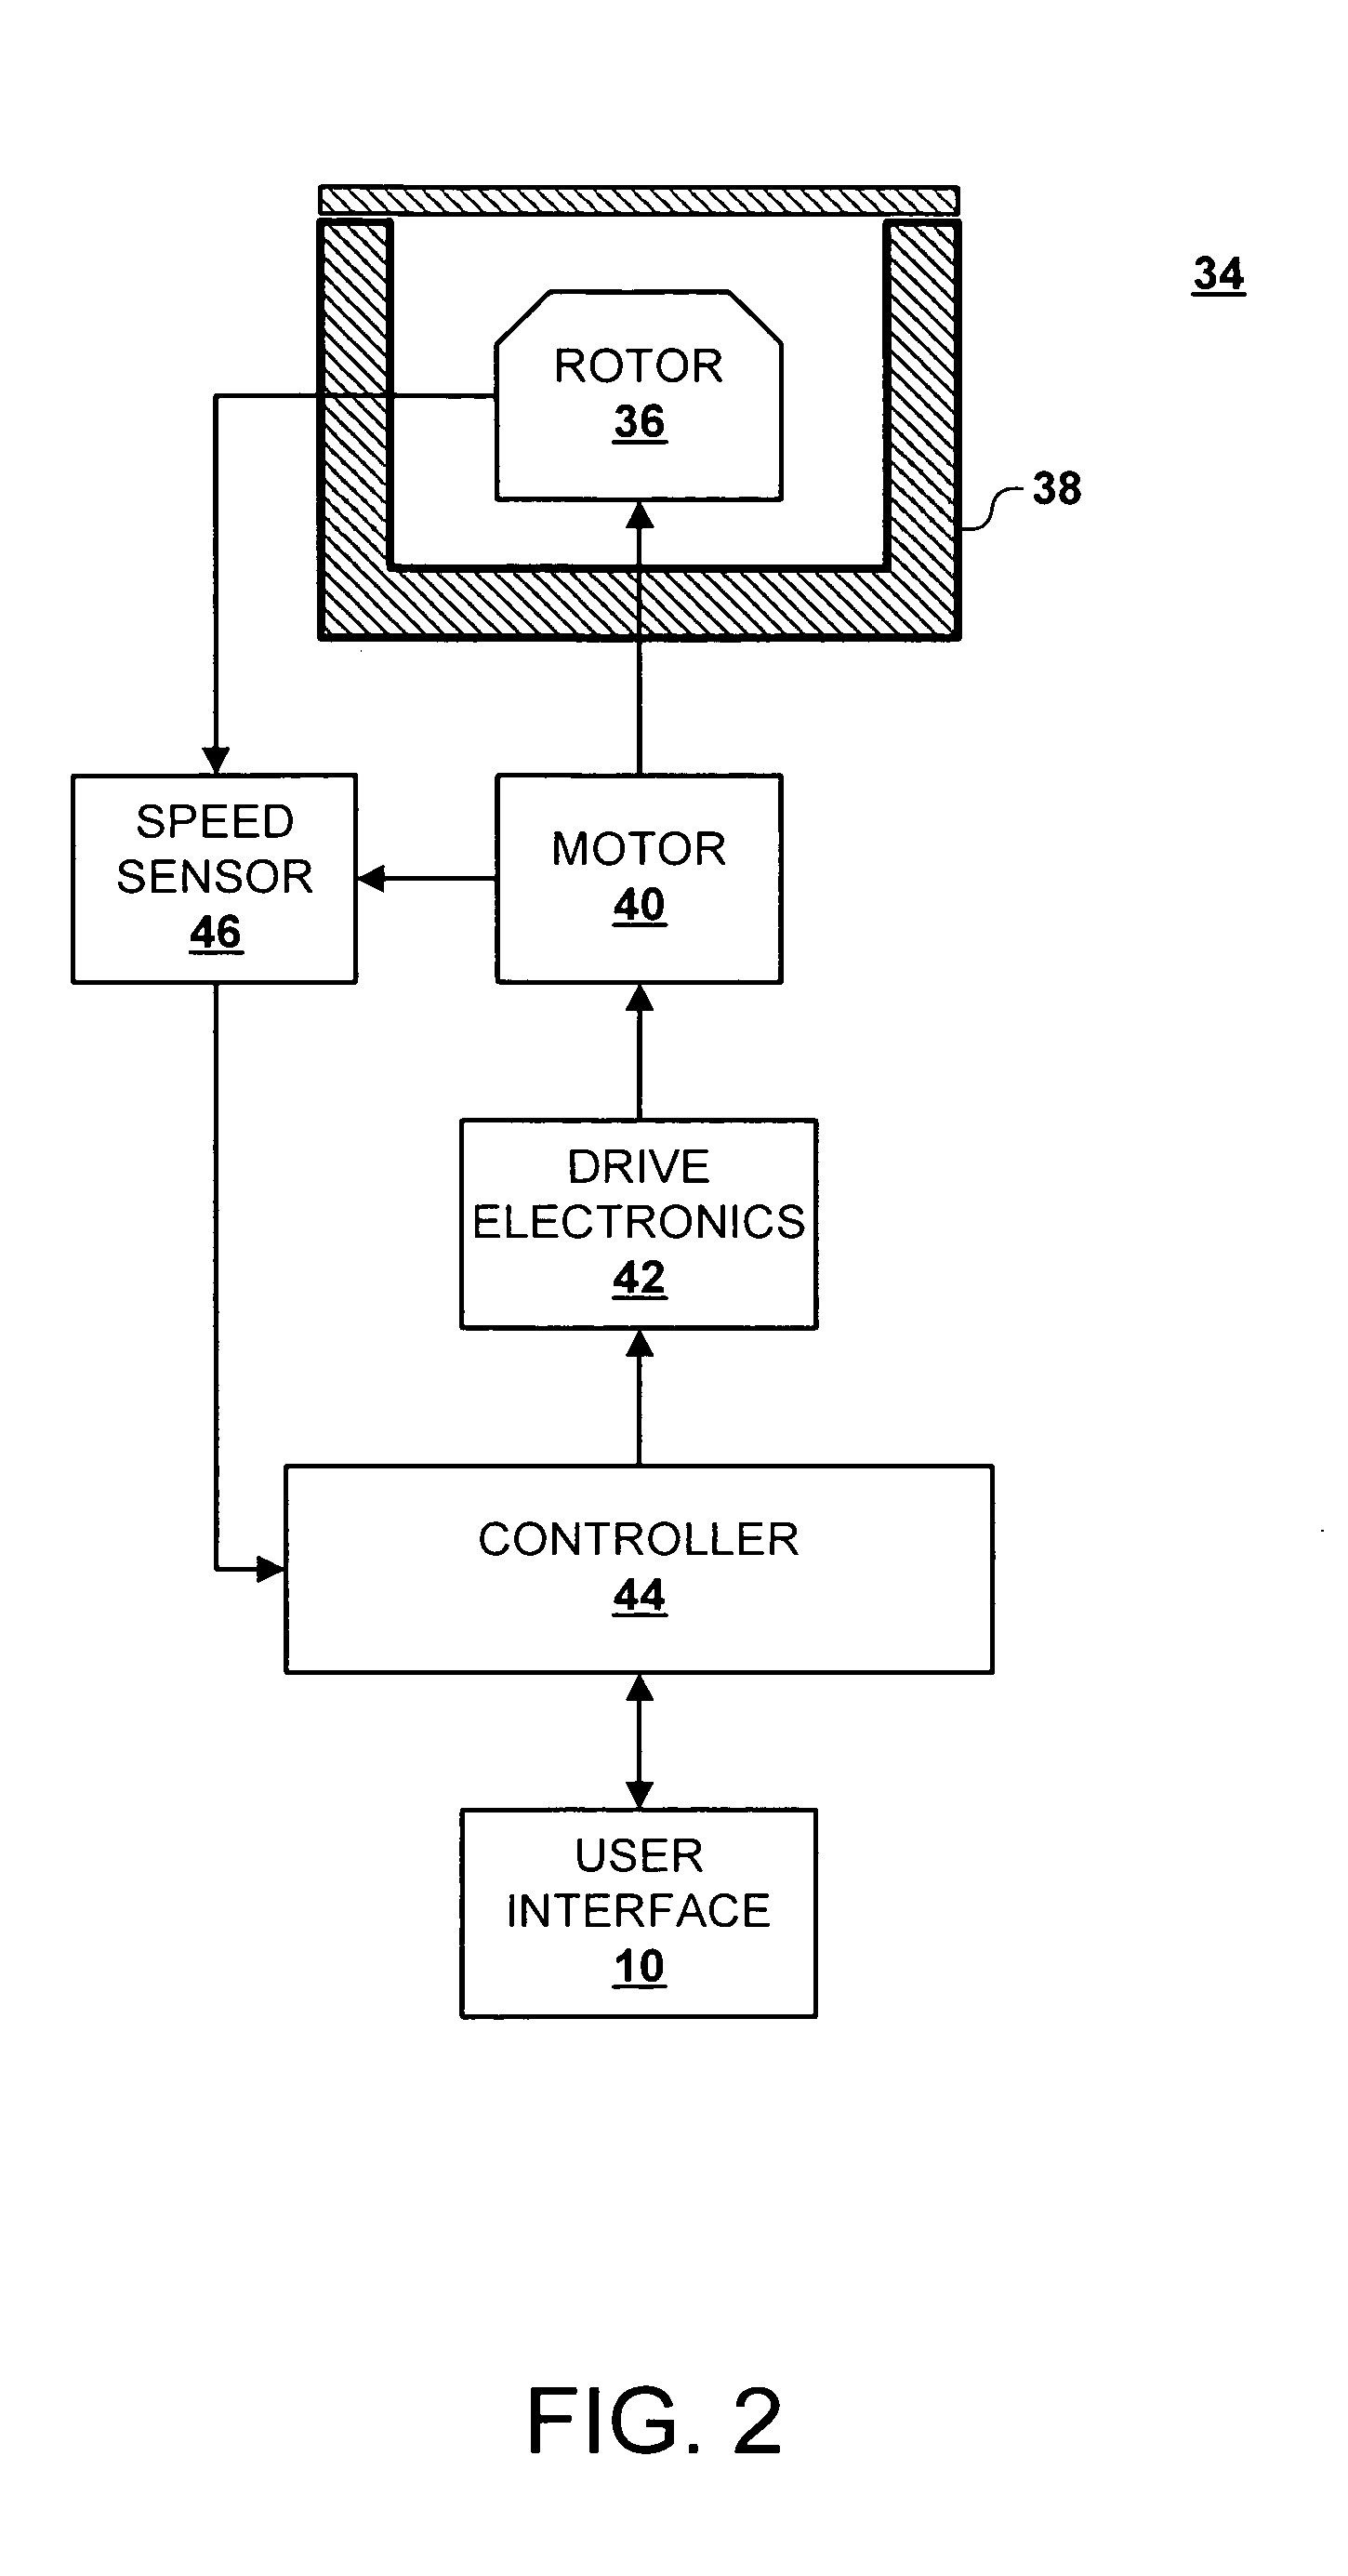 Rotor selection interface and method